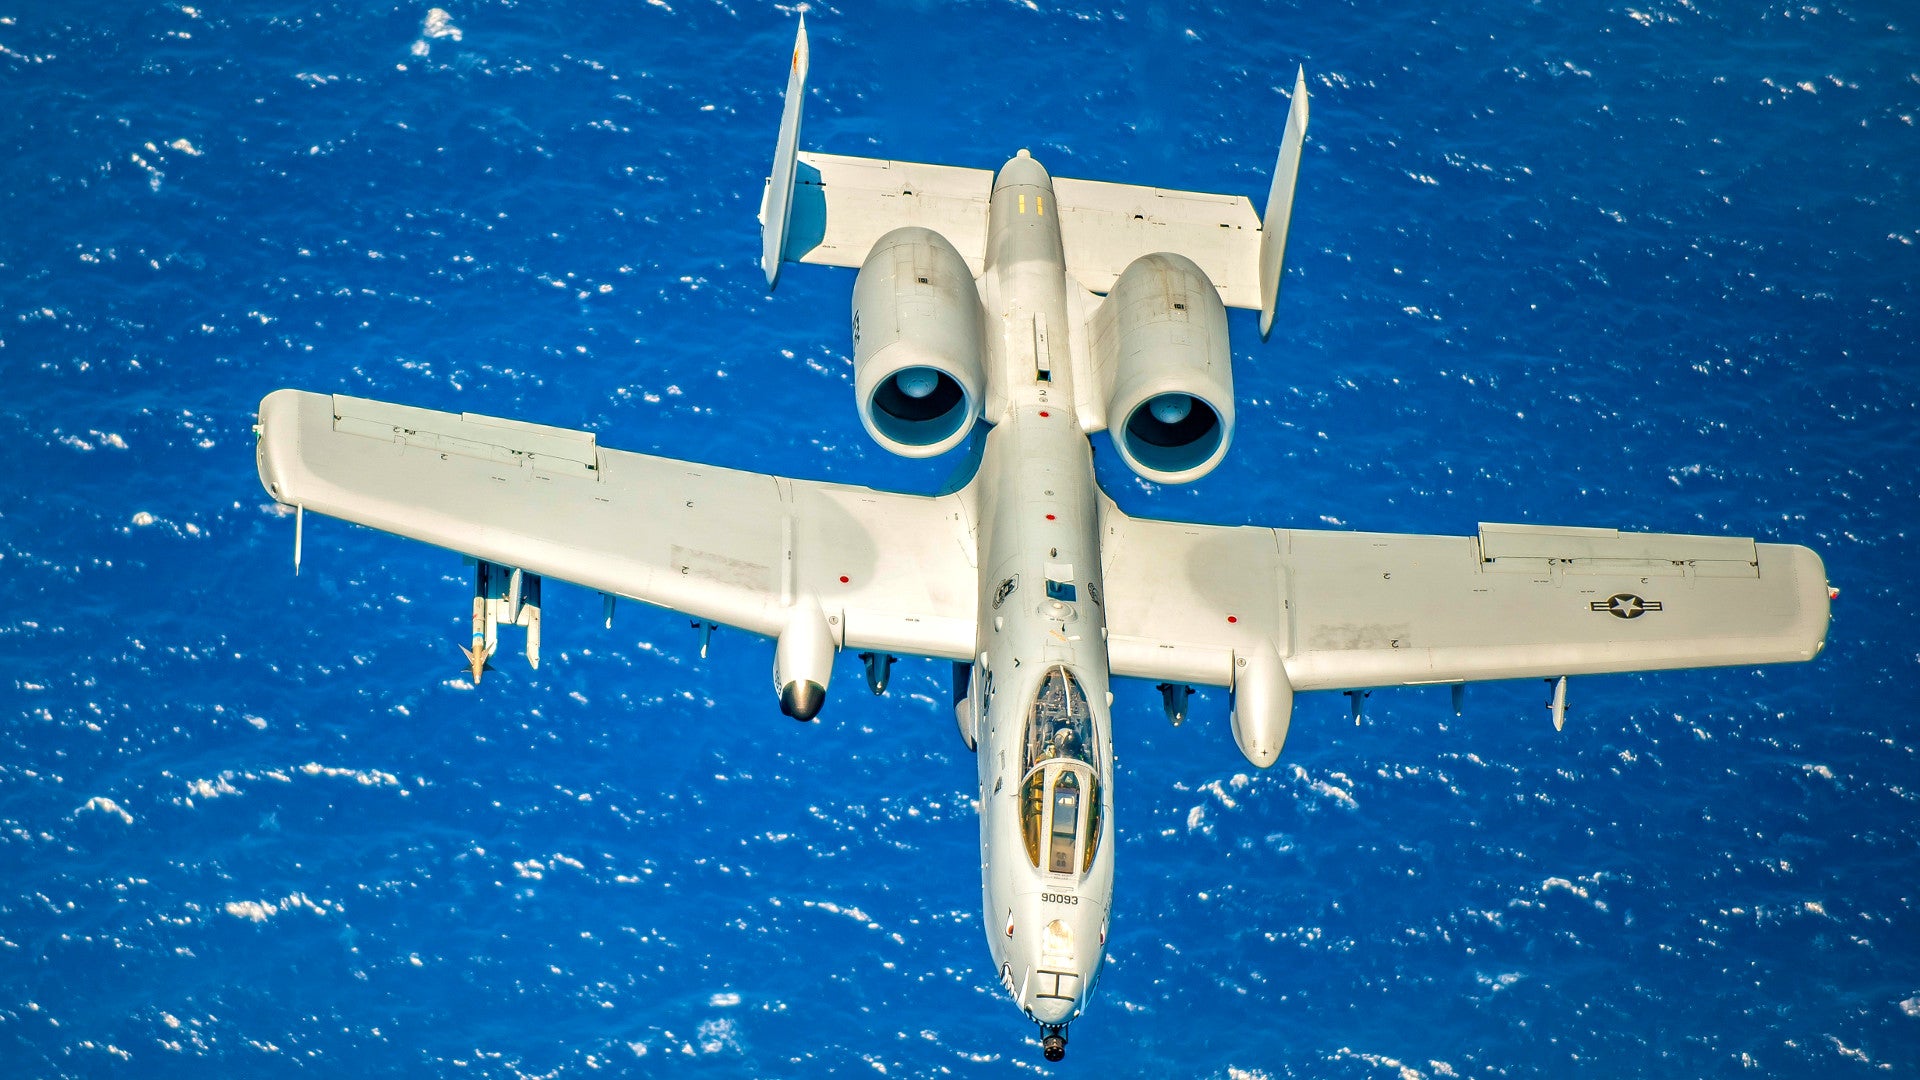 New A-10 Wing Kits Won’t Arrive For At Least Four Years And That’s Bad News For The Warthog